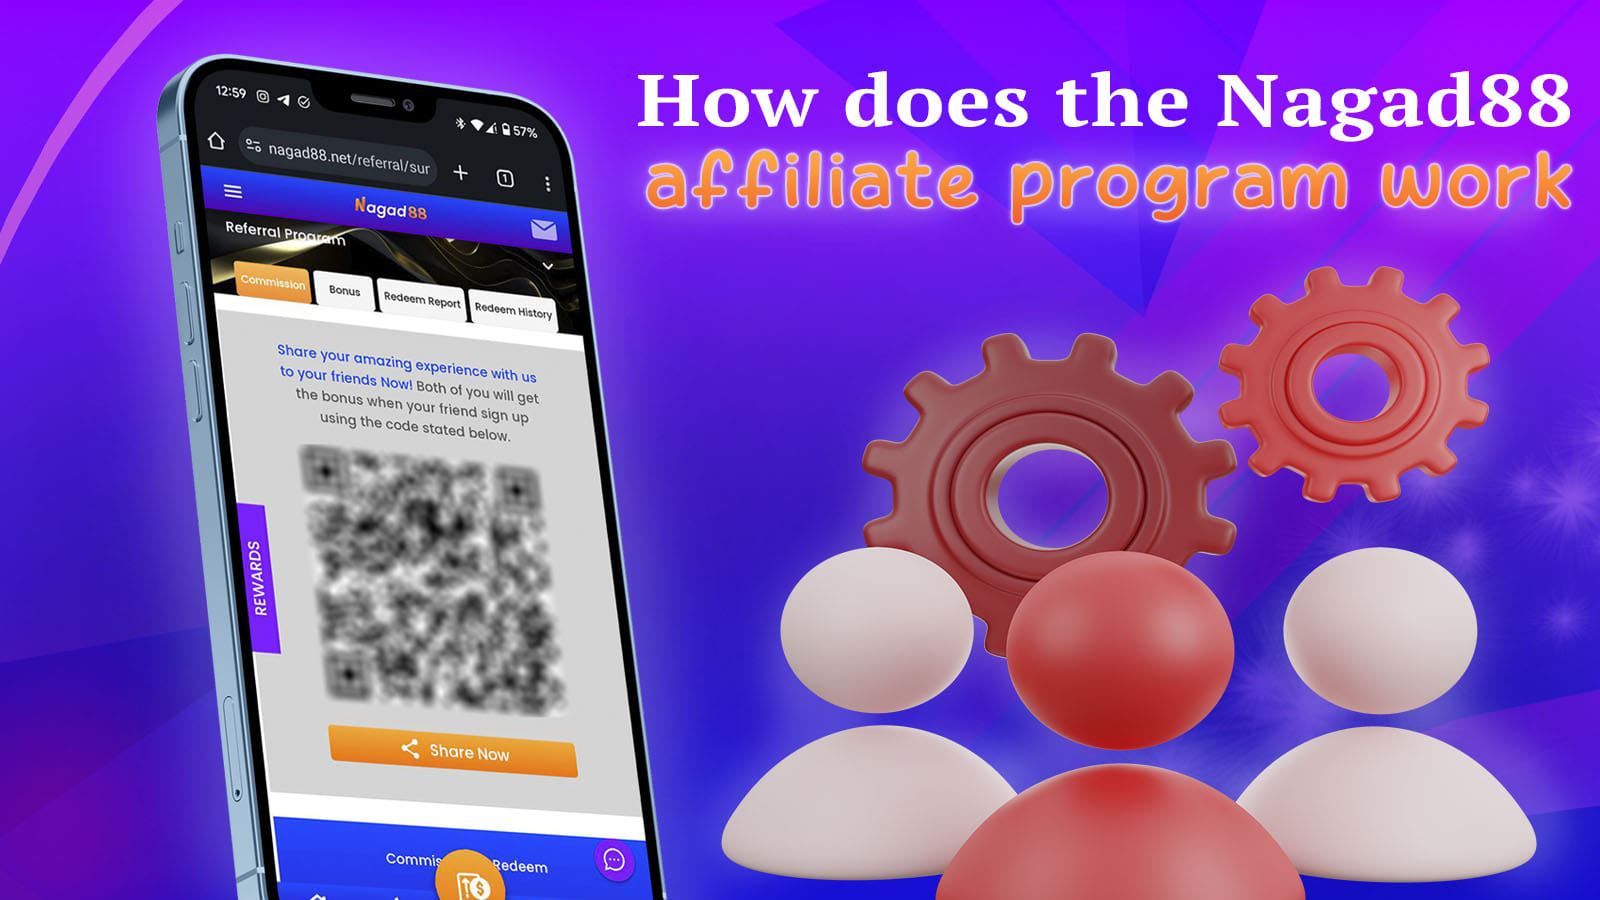 Nagad88 Affiliate Program is easy to use and most effective